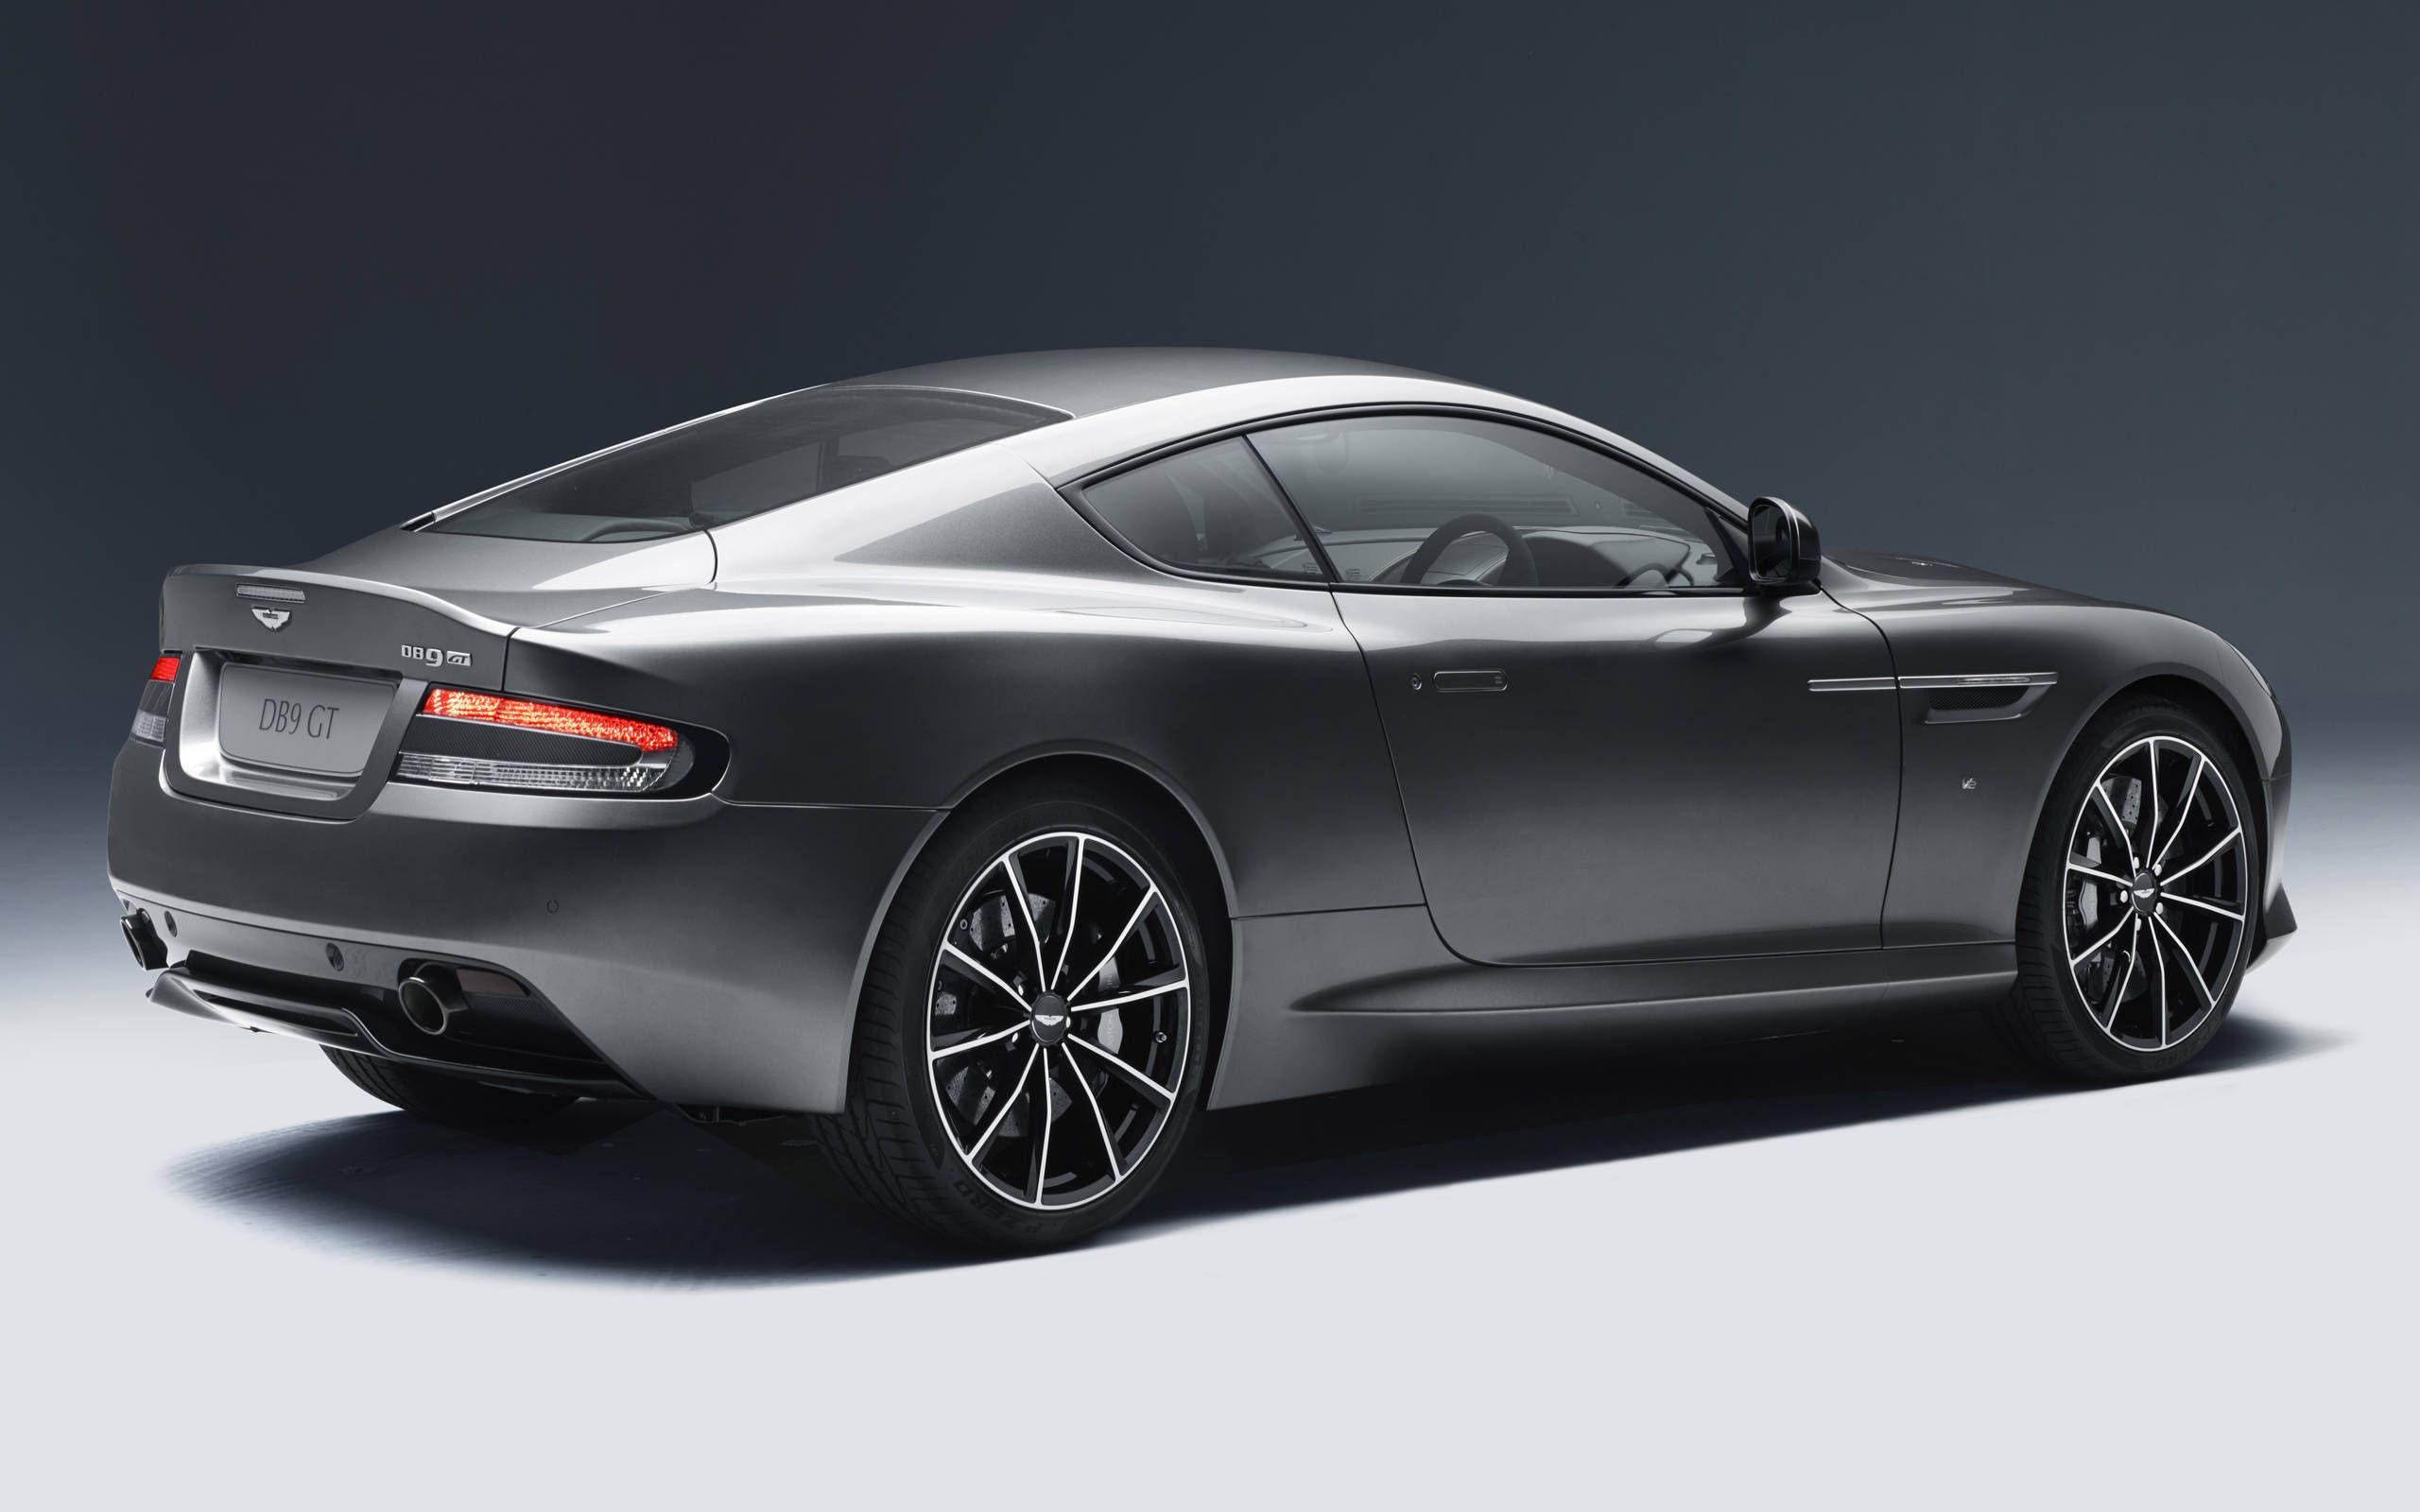 Aston Martin DB9 GT debuts with 540 hp